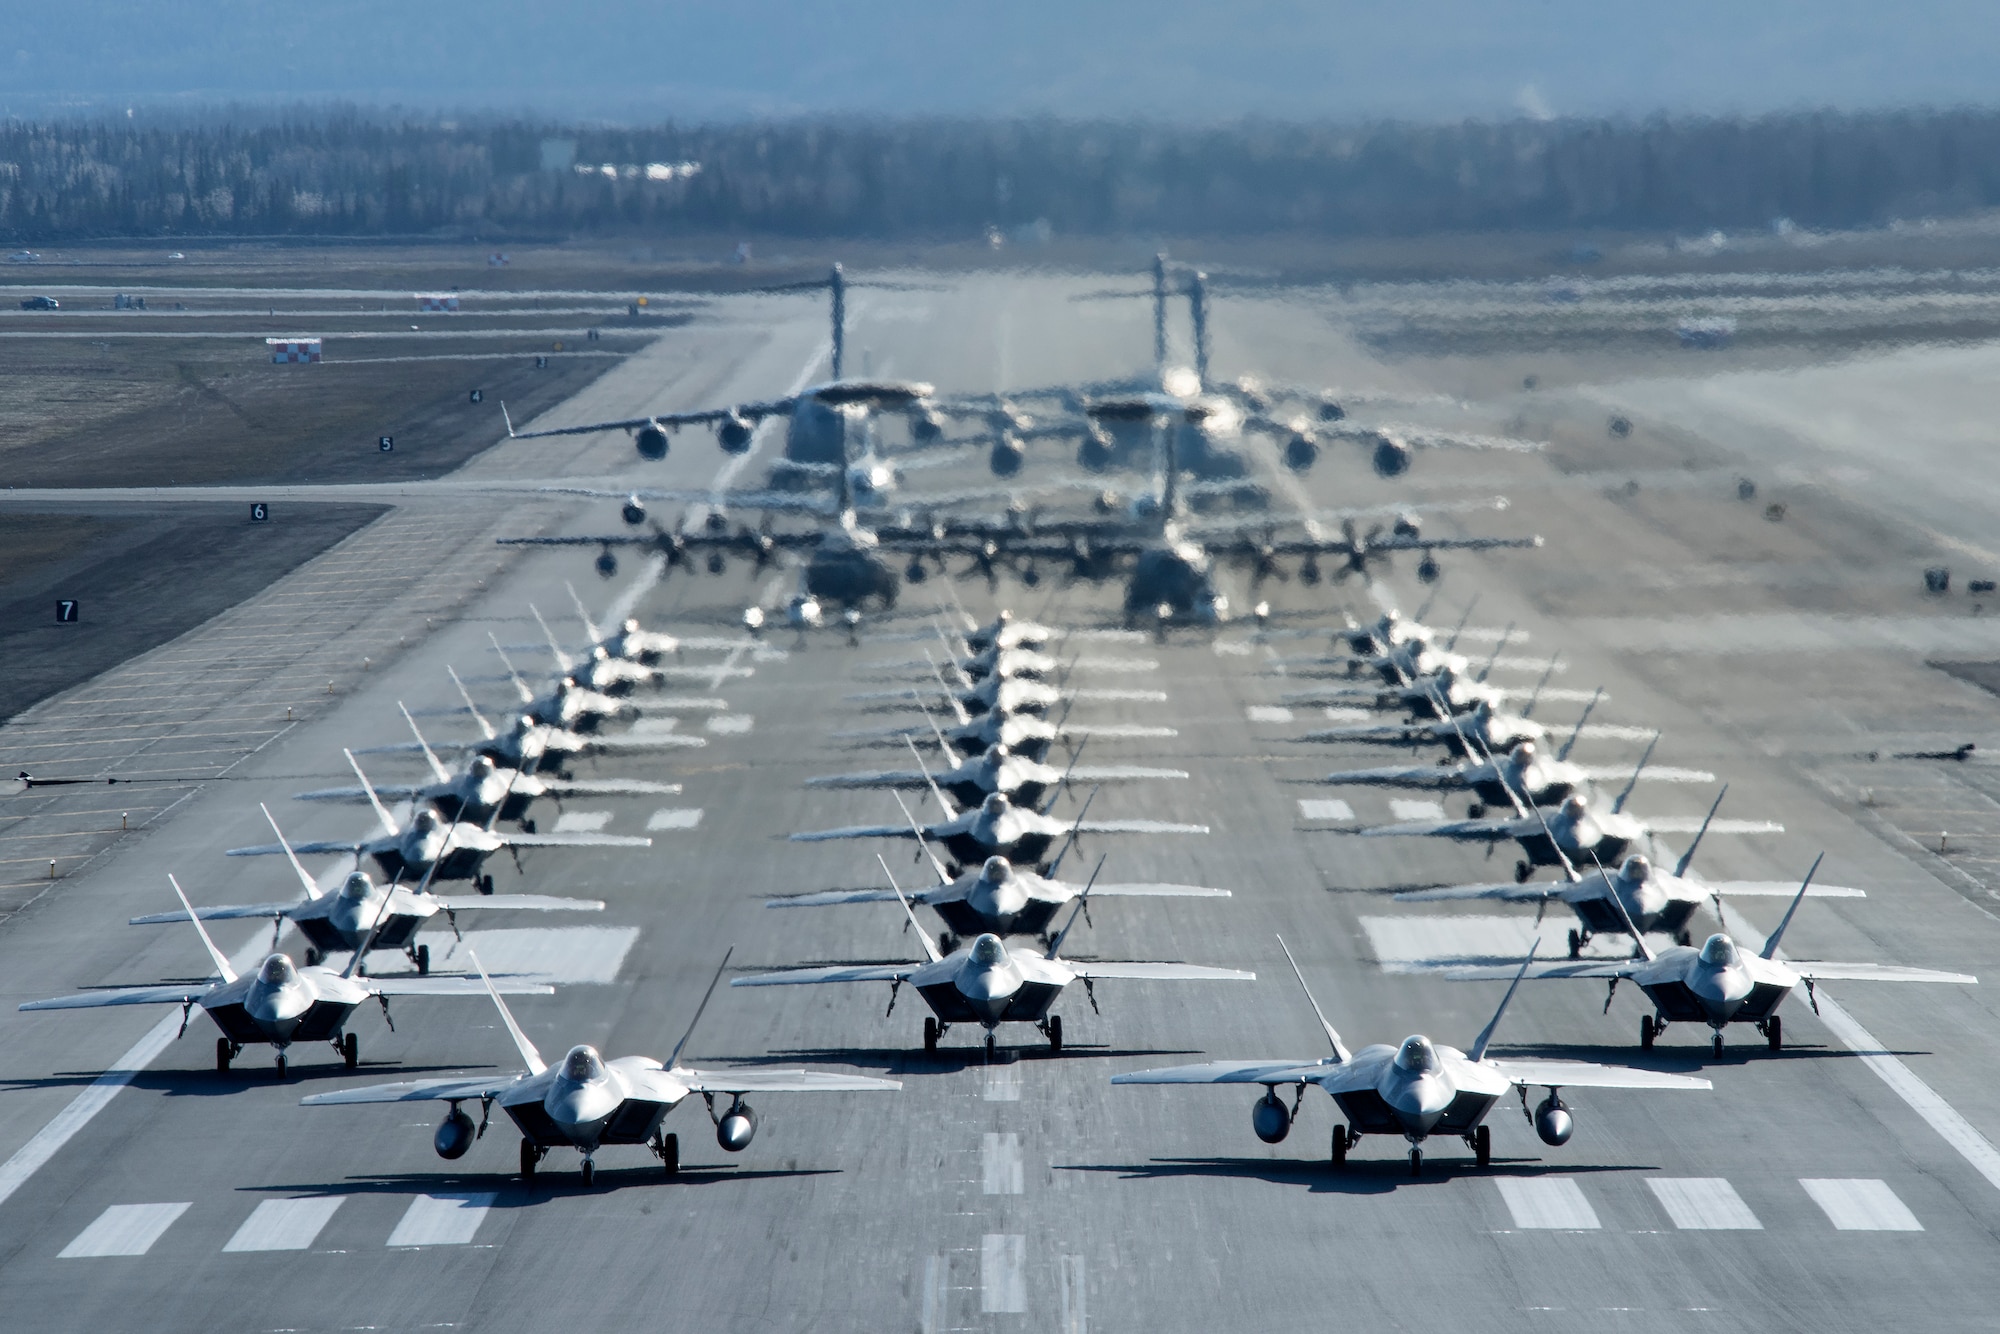 U.S. Air Force F-22 Raptors, E-3 Sentrys, C-17 Globemaster IIIs, C-130J Herculeses and C-12F Hurons participate in a close formation taxi known as an elephant walk at Joint Base Elmendorf-Richardson, Alaska, May 5, 2020. This event displayed the ability of the 3rd Wing, 176th Wing and the 477th Fighter Group to maintain constant readiness throughout COVID-19 by Total Force Integration between active-duty, Guard and Reserve units to continue defending the U.S. homeland and ensuring a free and open Indo-Pacific.